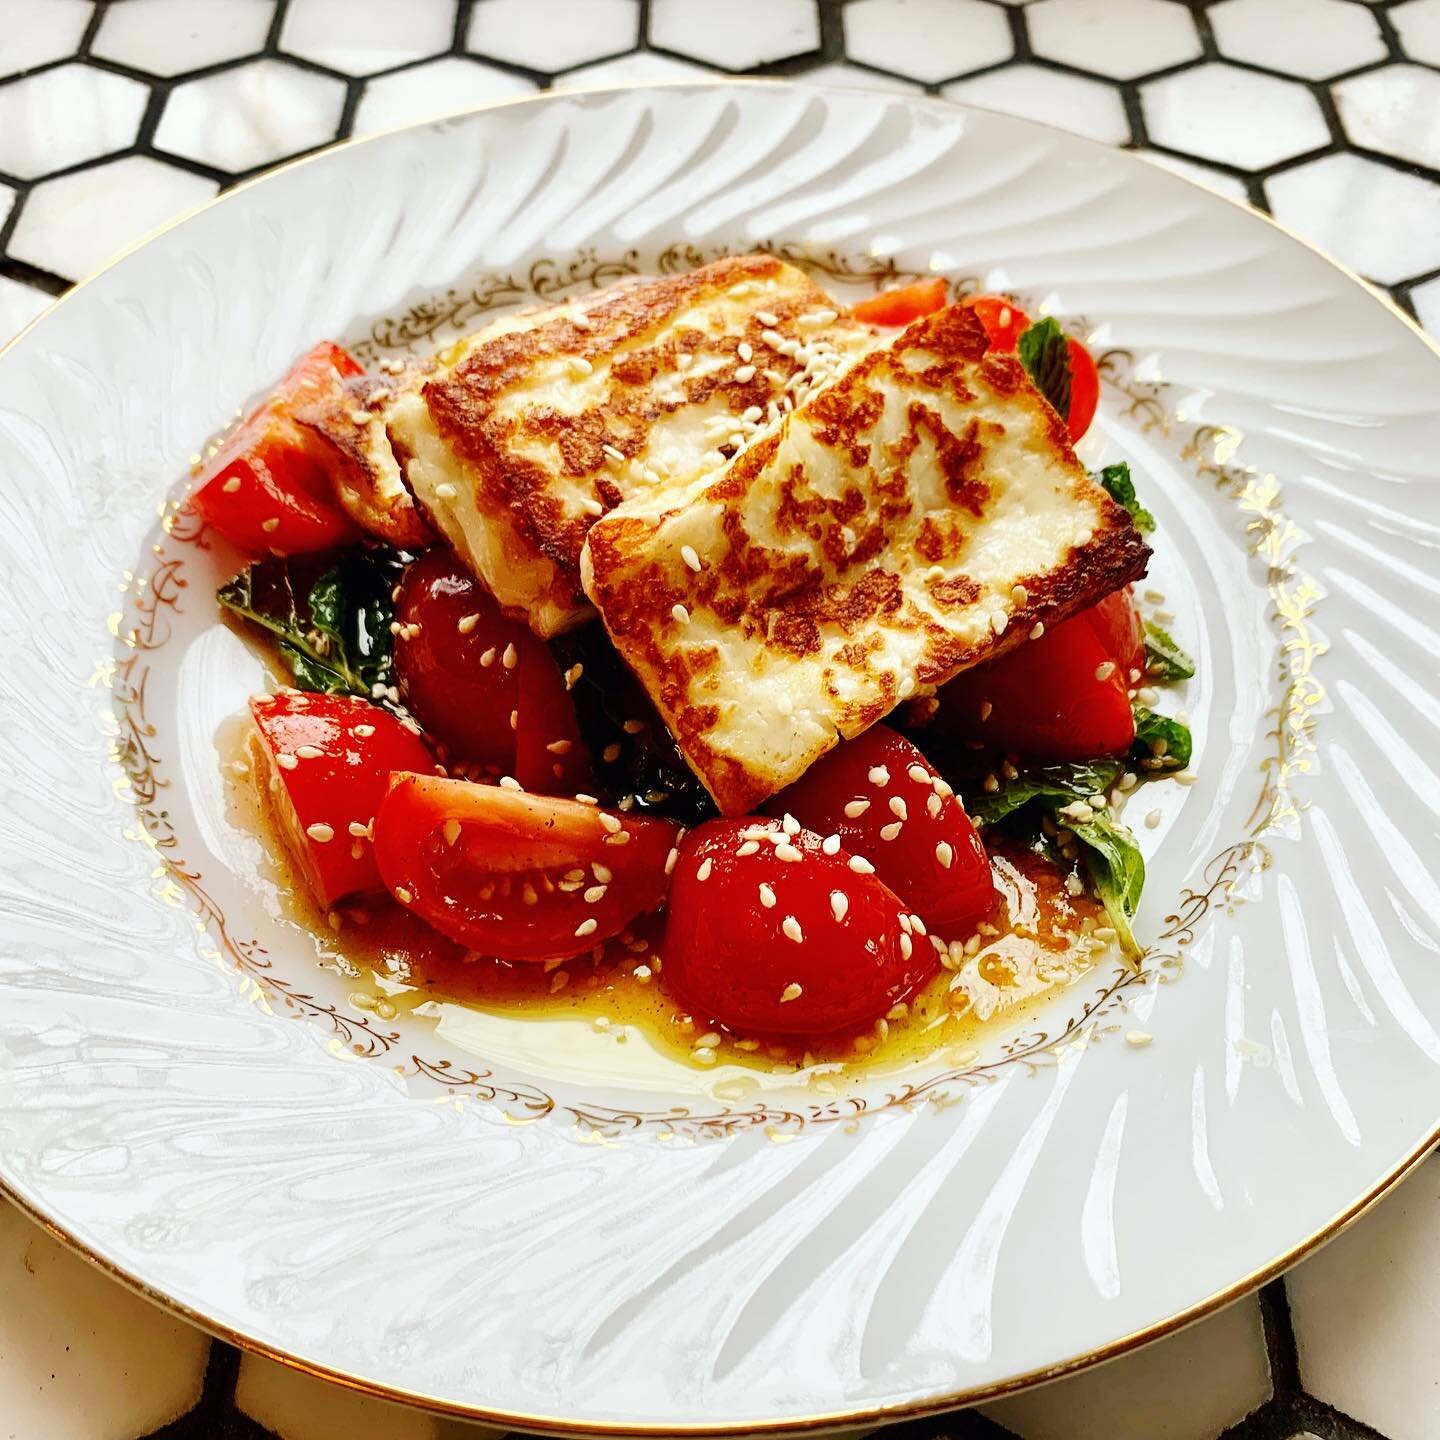 *New dish allert* it&rsquo;s the Halloumi &amp; Tomato Salad! Just in time for spring 🌼  Grilled halloumi cheese, campari tomatoes, mint &amp; za&rsquo;atar. 🍅🌿 $13 

Available for dine in and pick up!  Come hang with us from noon to 10 (11 on the